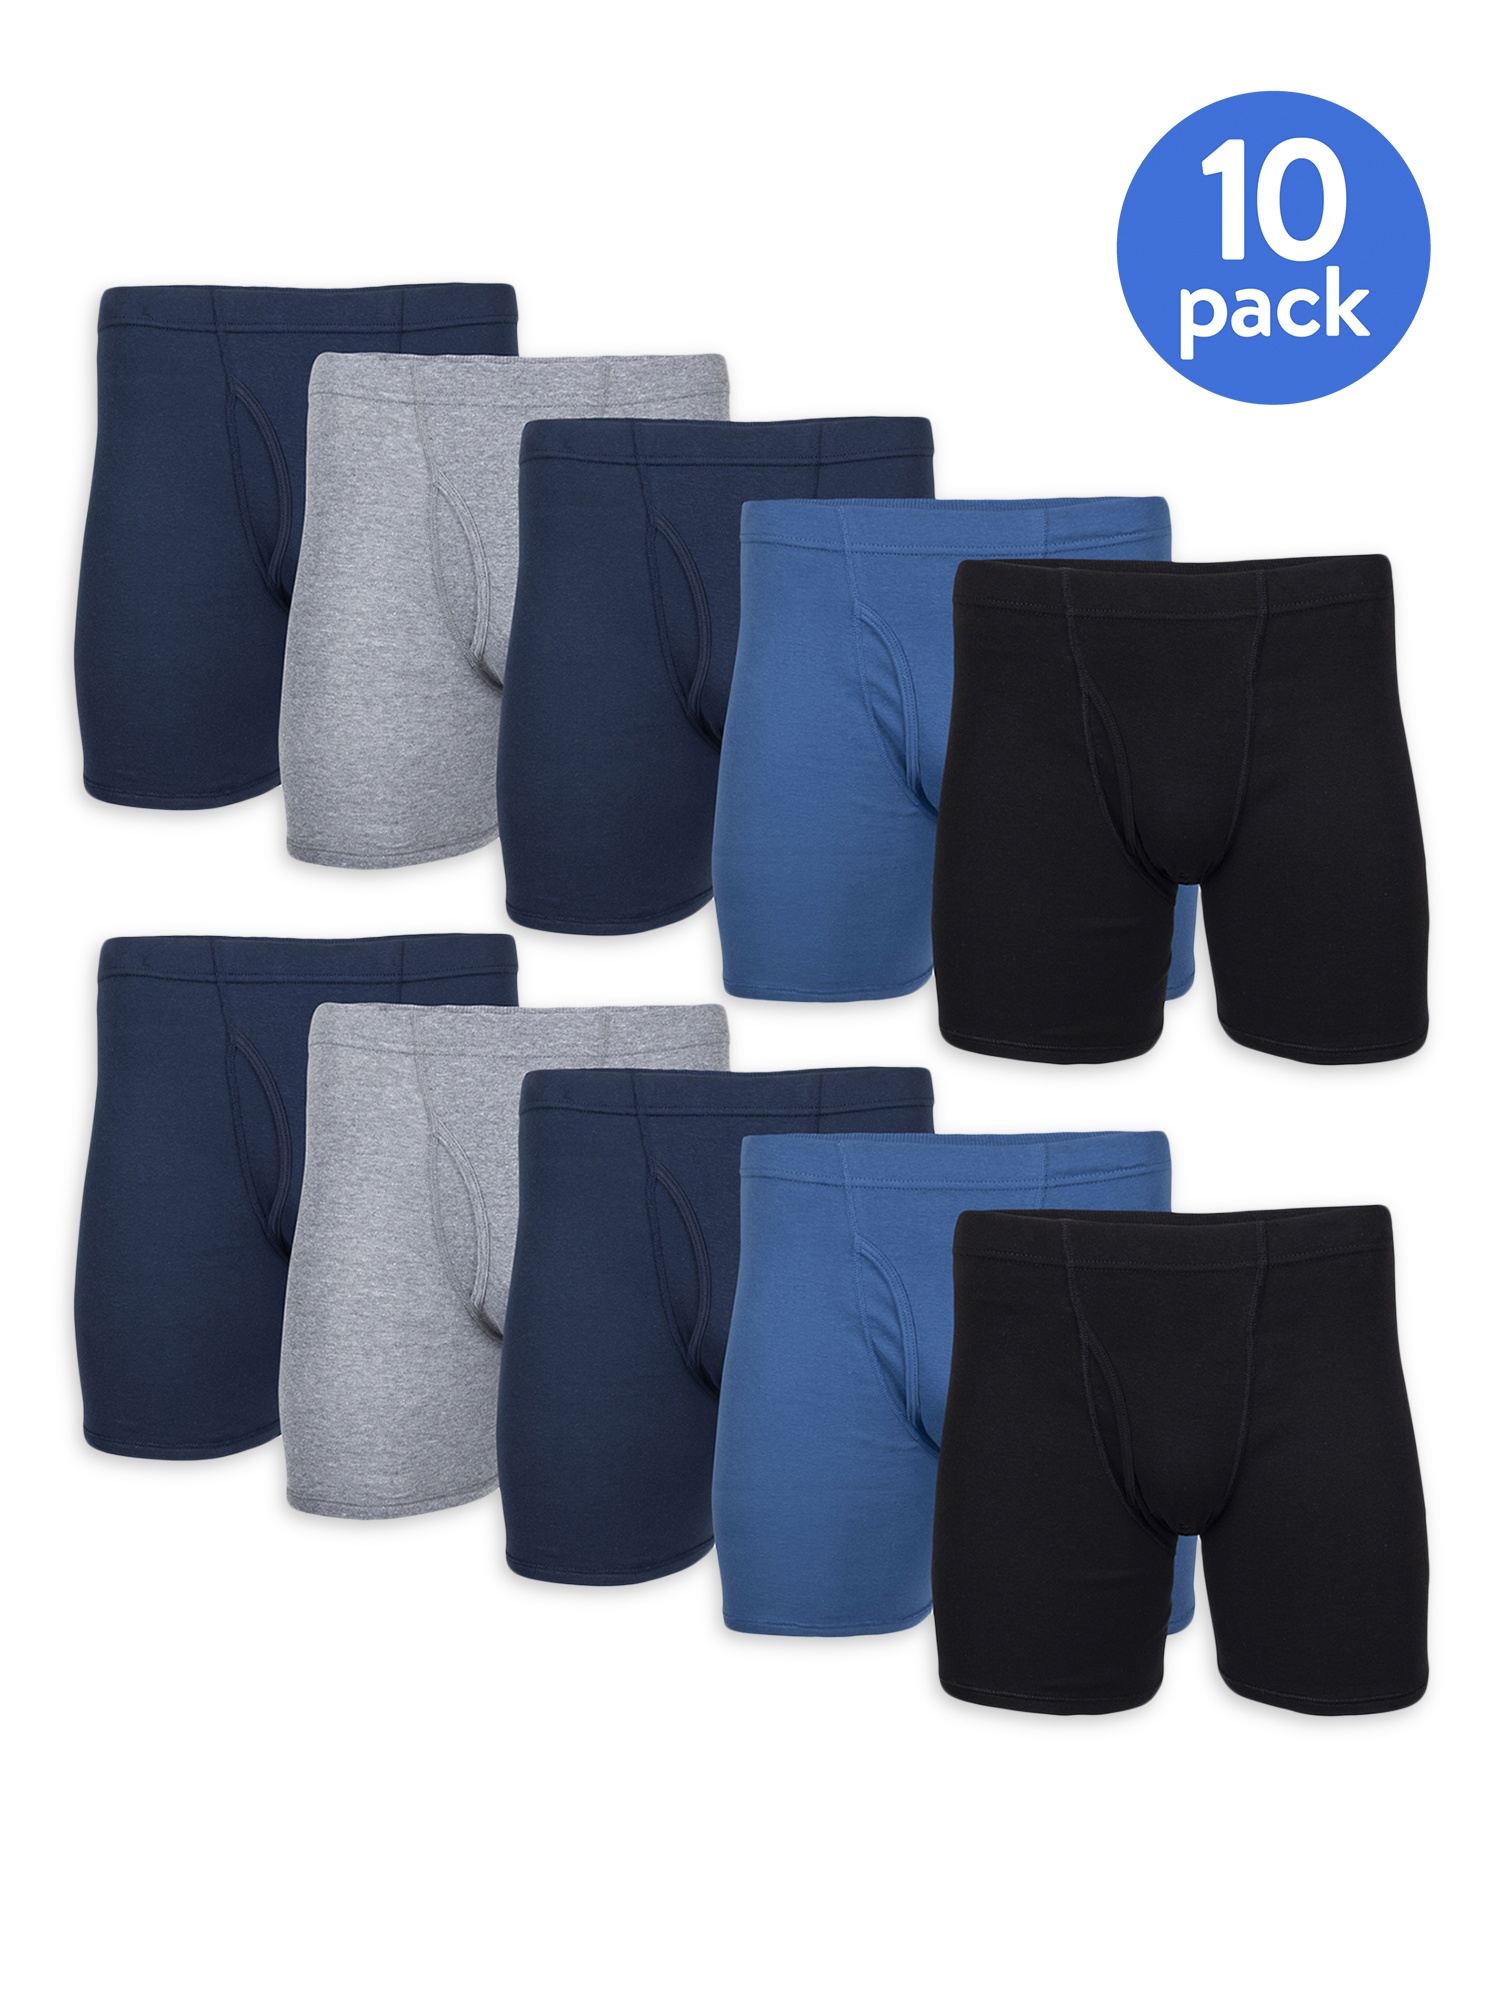 10-Count George Men's Covered Waistband Regular Leg Boxer Briefs $18 + Free Shipping with Walmart+ or Free S/H $35+